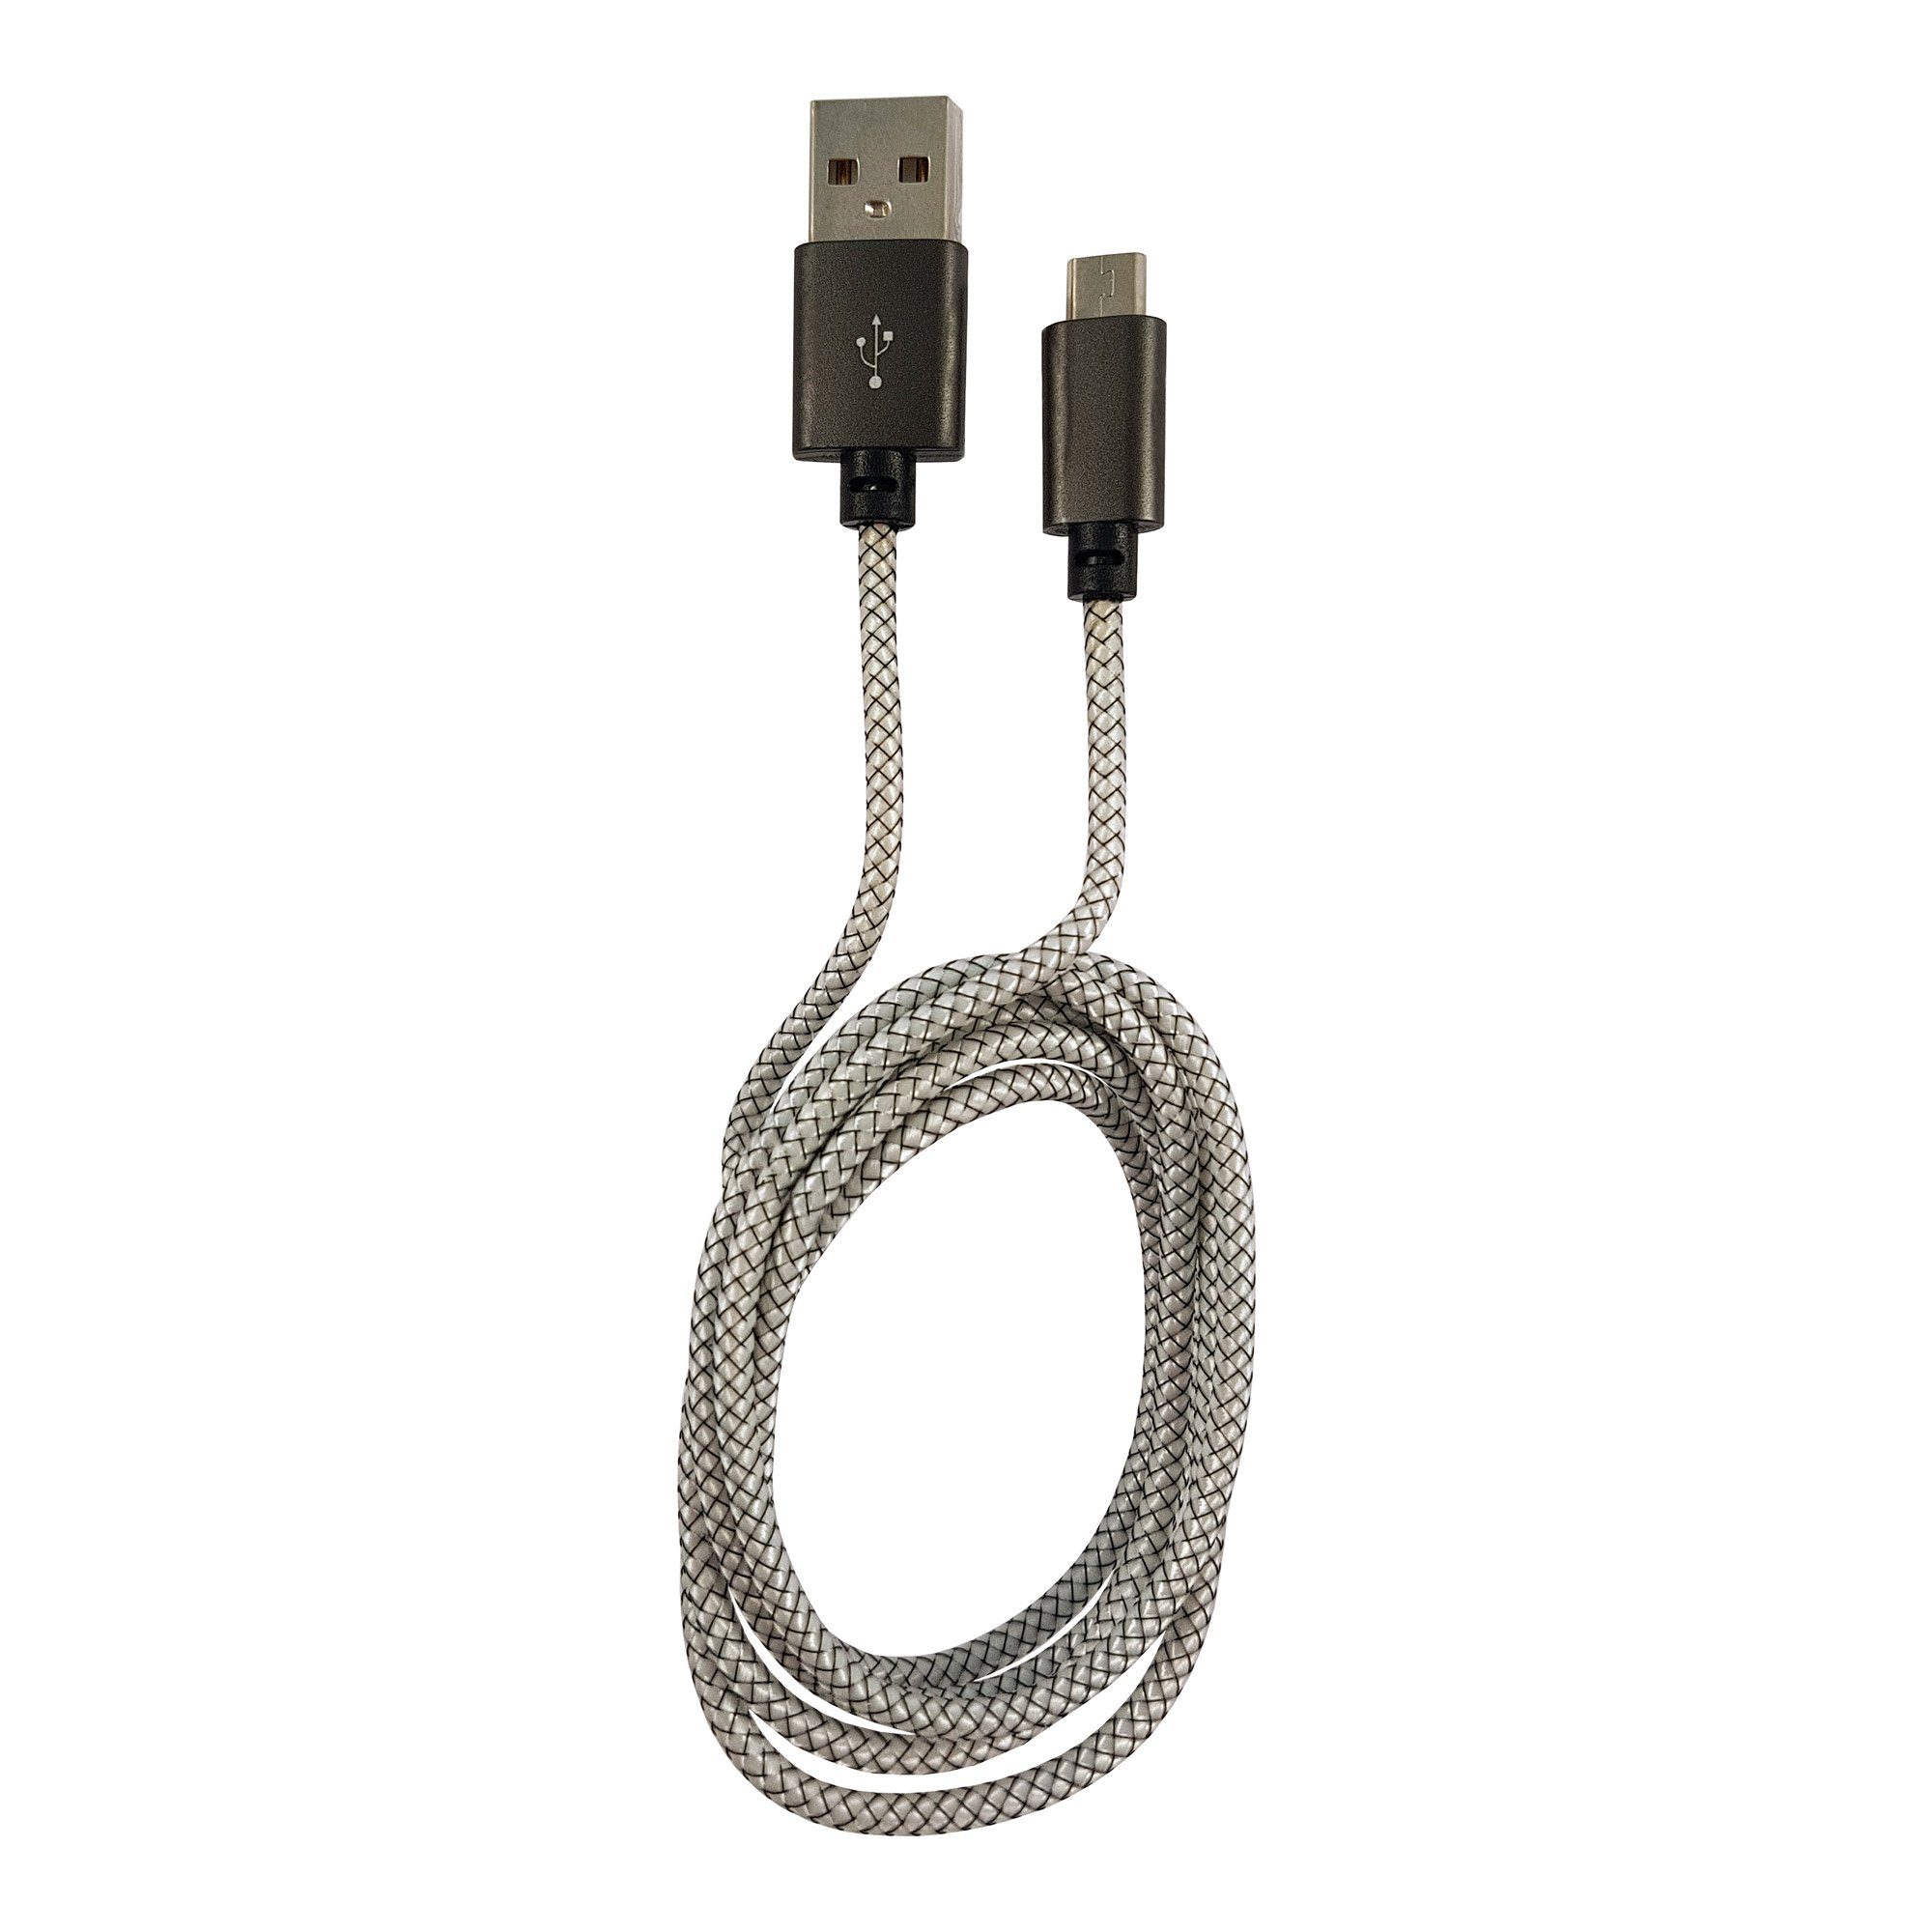 zu LC-C-USB-MICRO-1M-1 LC-Power LC-Power LC-Power USB Isolierband LC-C-USB-MICRO-1M-1 A